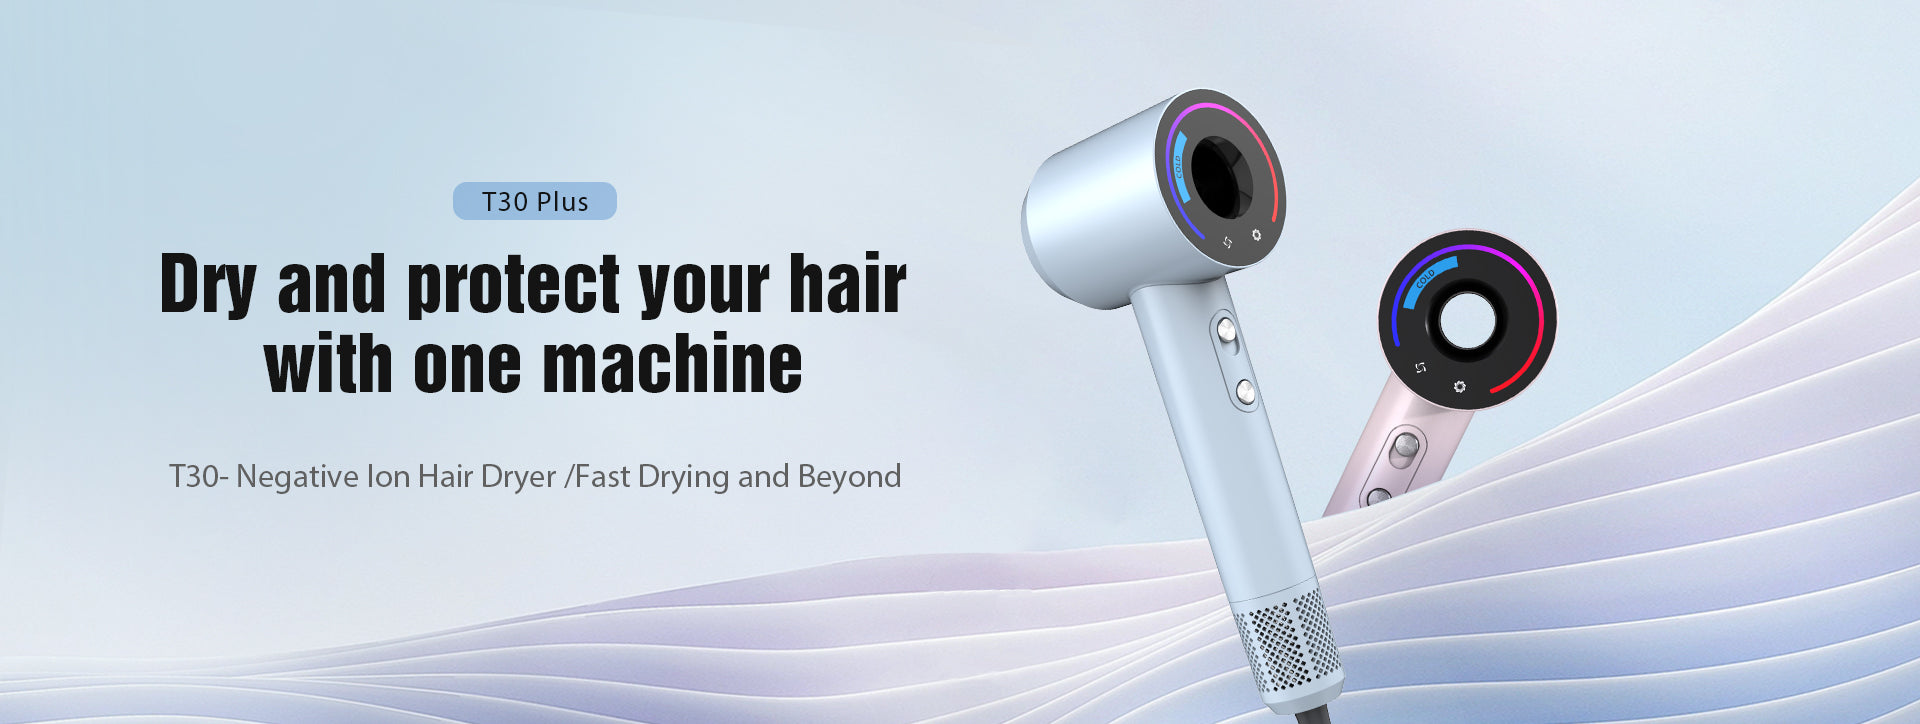 Dry_and_protect_your_hairwith_one_machine